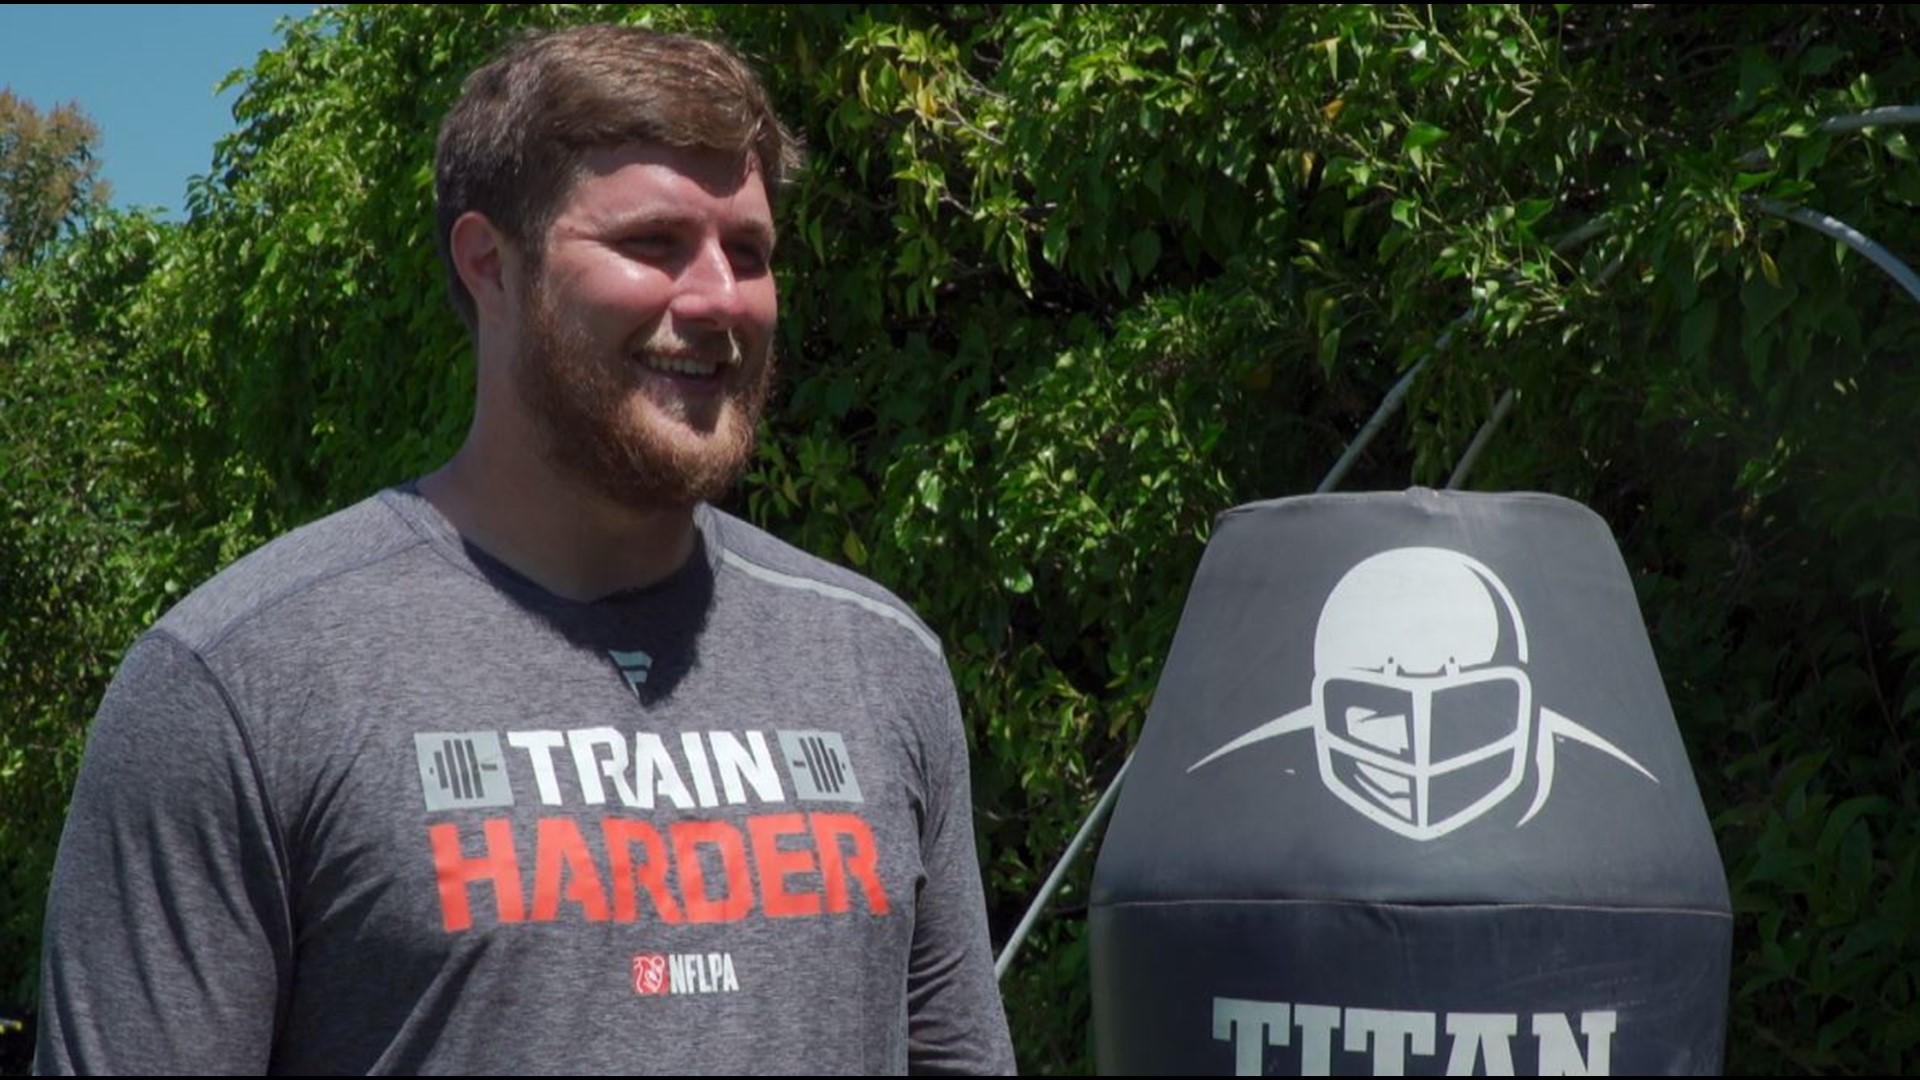 Sacramento native (Roseville) Kolton Miller speaks with ABC10’s Sean Cunningham about heading into his second training camp in Napa with the Raiders, what he learned from his rookie season in Oakland, the unique situation of having HBO’s “Hard Knocks” around the team and the best perks of being an NFL player.